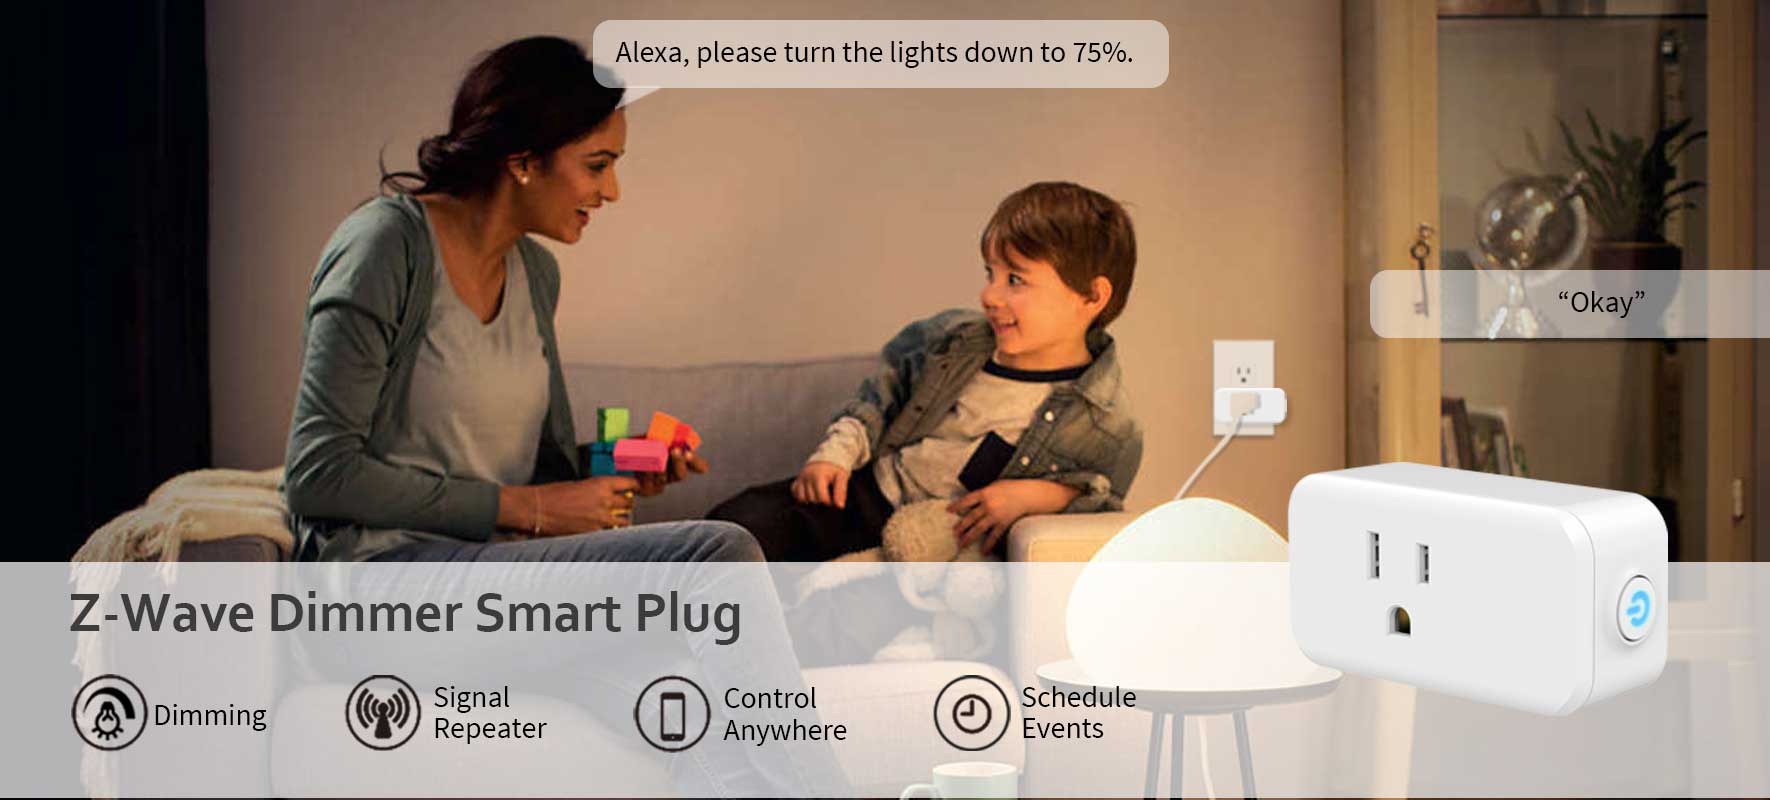 New One Z-Wave Plug With Electricity Monitoring, 700 Series Zwave Smart Plug,Z-Wave  Hub Required, Z Wave Plug Work With Wink, Sm